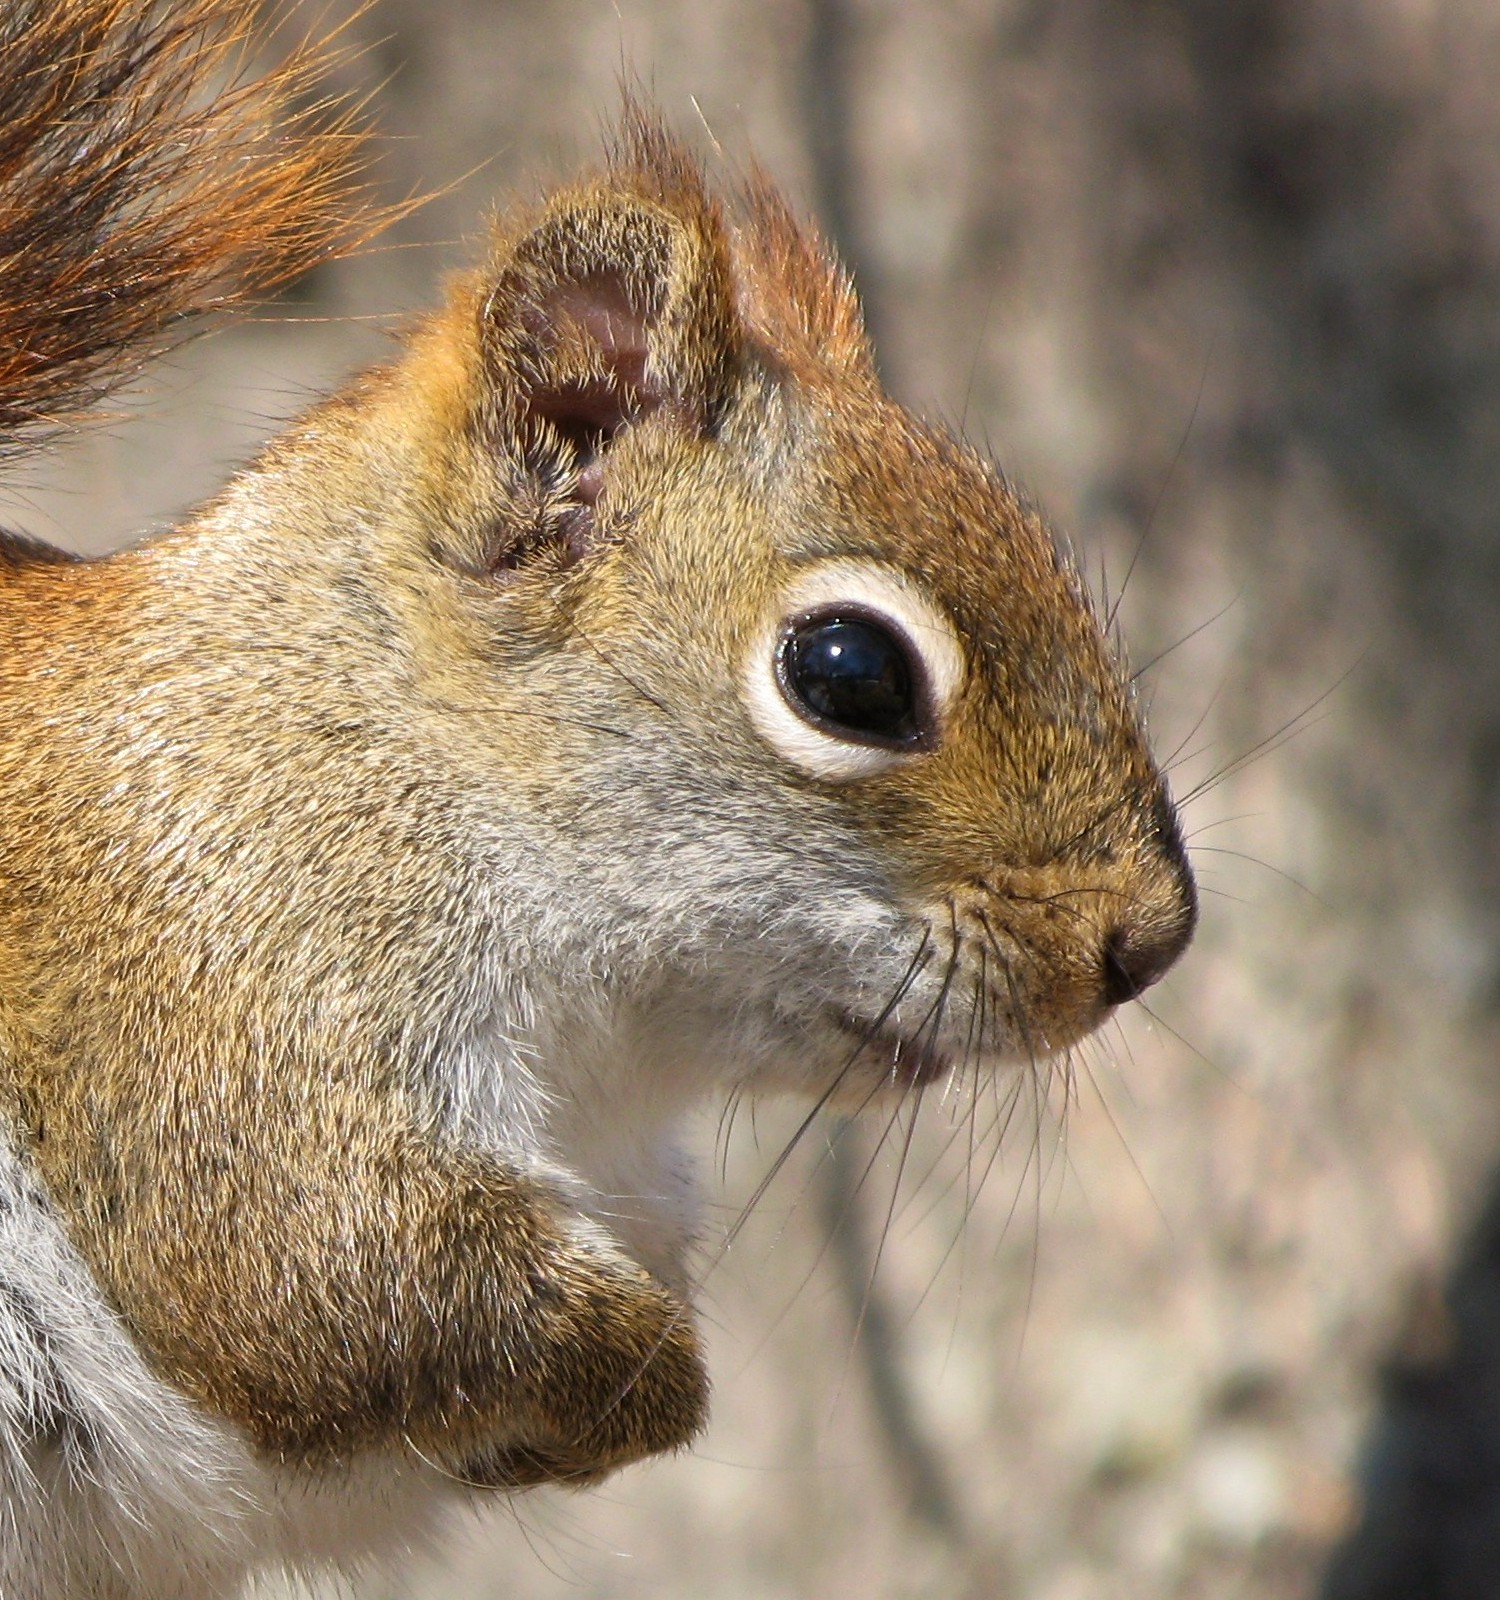 a close up s of the head of a squirrel